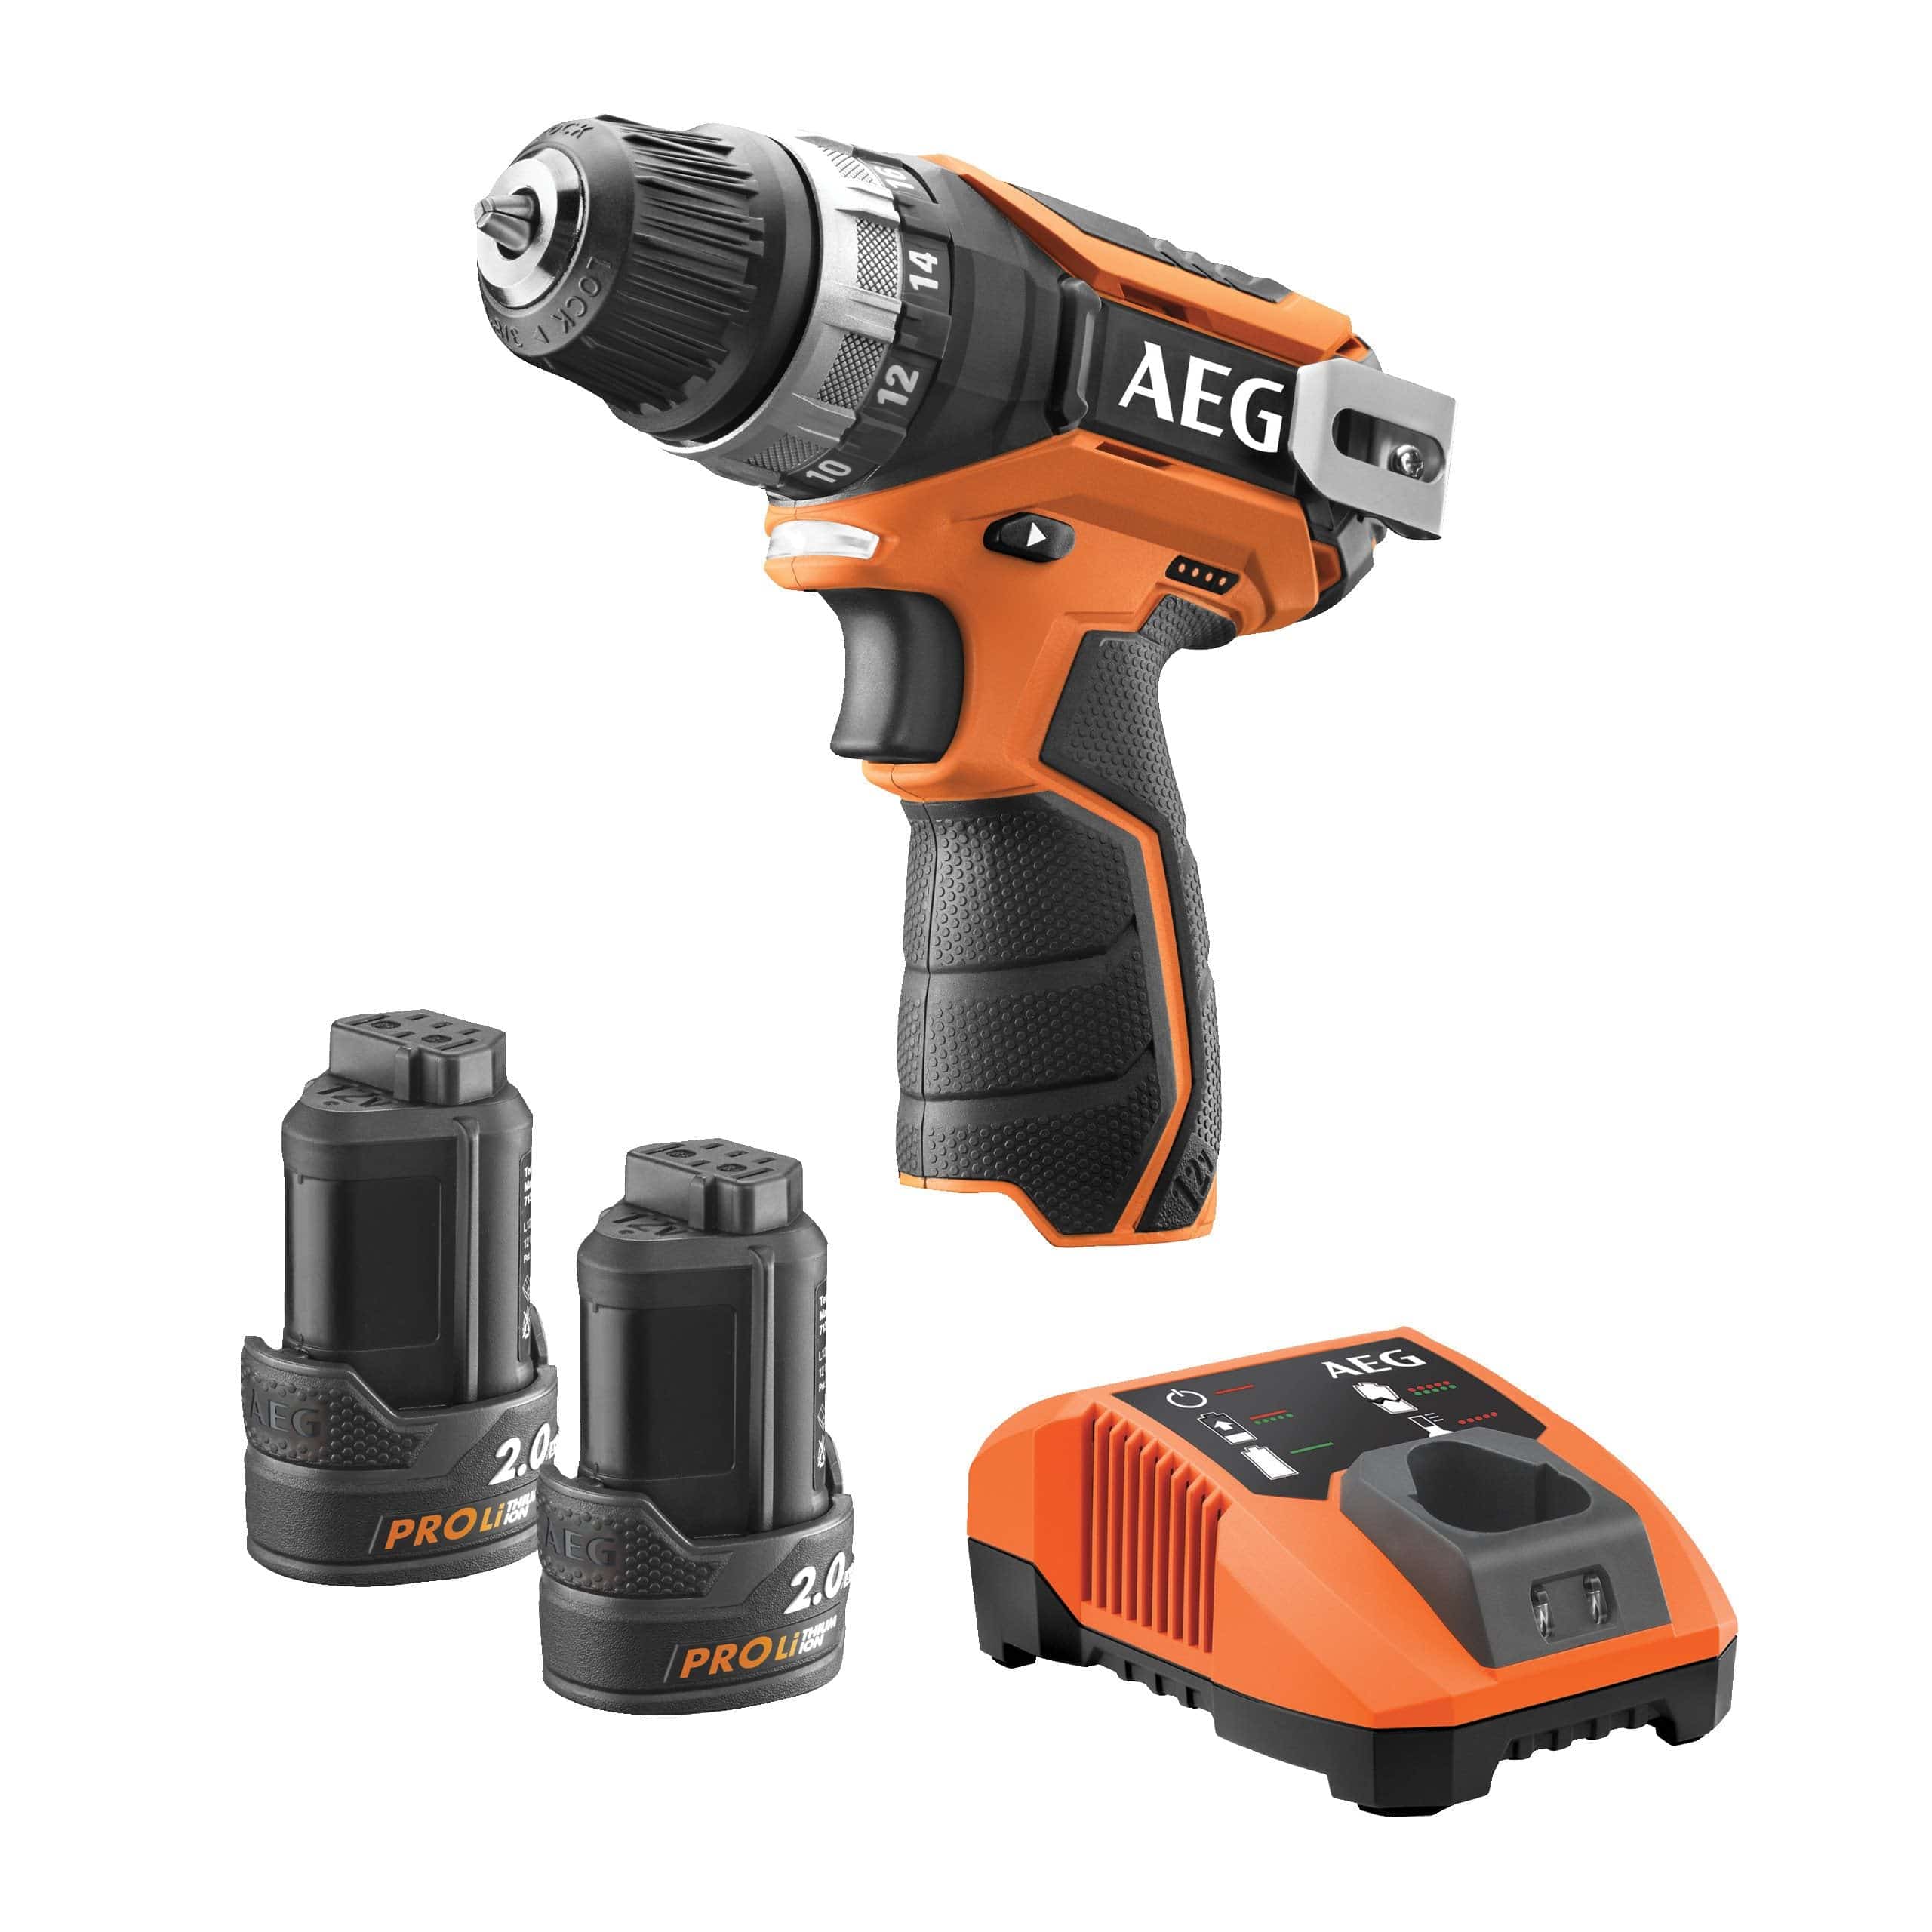 AEG Lithium-Ion Cordless Drill 12V 2.0Ah (BS12C) - Compact Power for Drilling and Fastening in Accra, Ghana | Supply Master Drill Buy Tools hardware Building materials